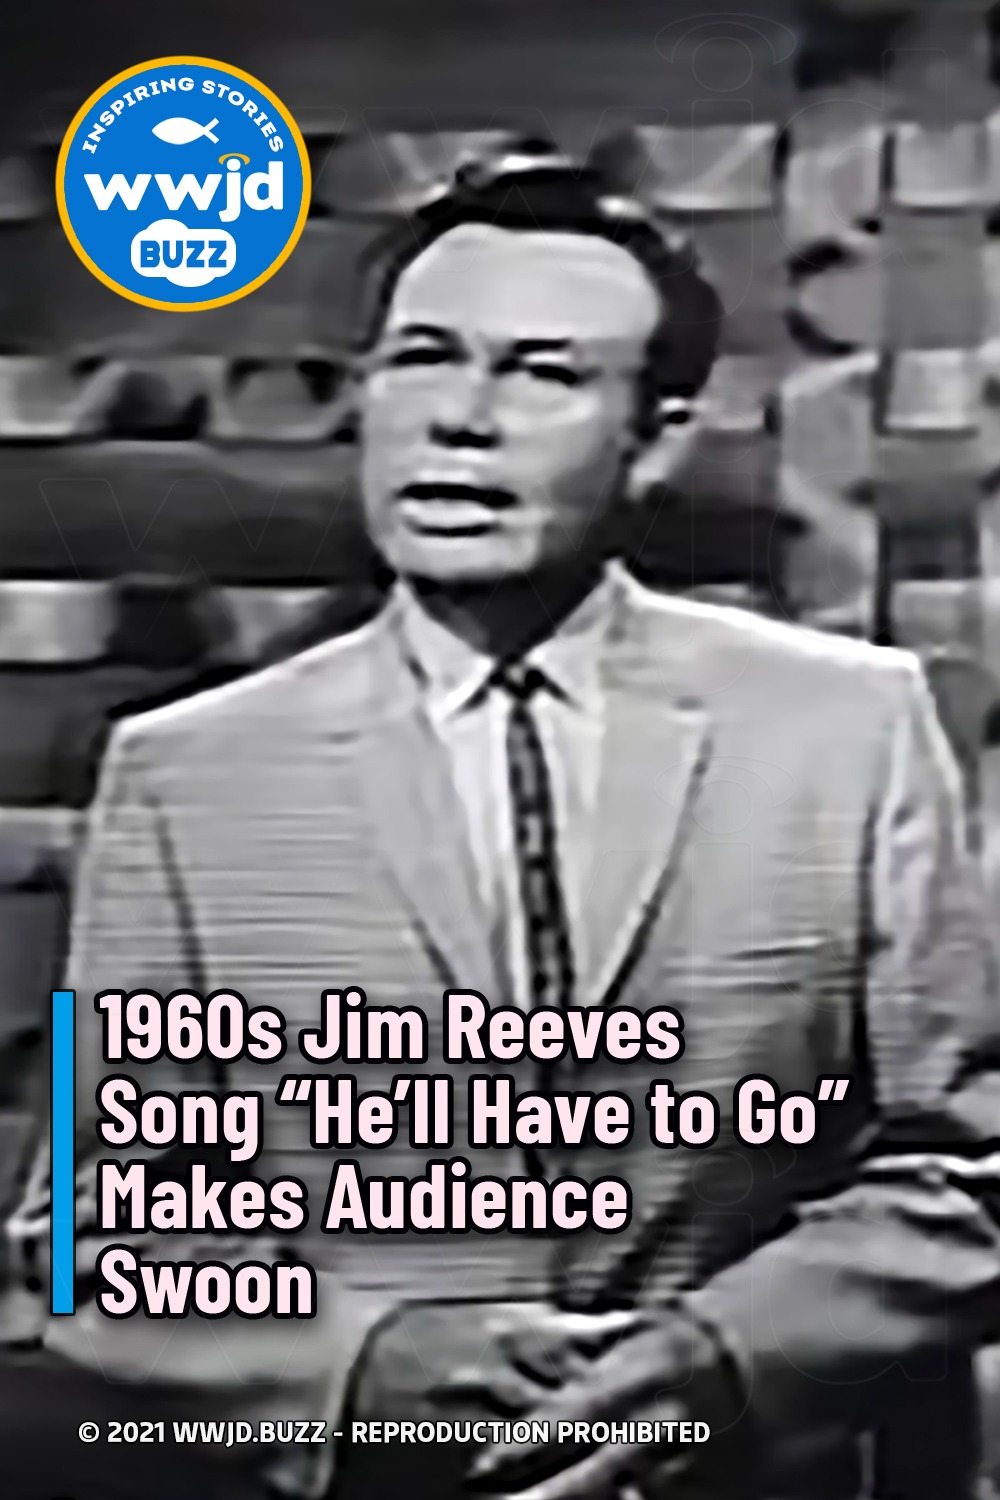 1960s Jim Reeves Song “He’ll Have to Go” Makes Audience Swoon